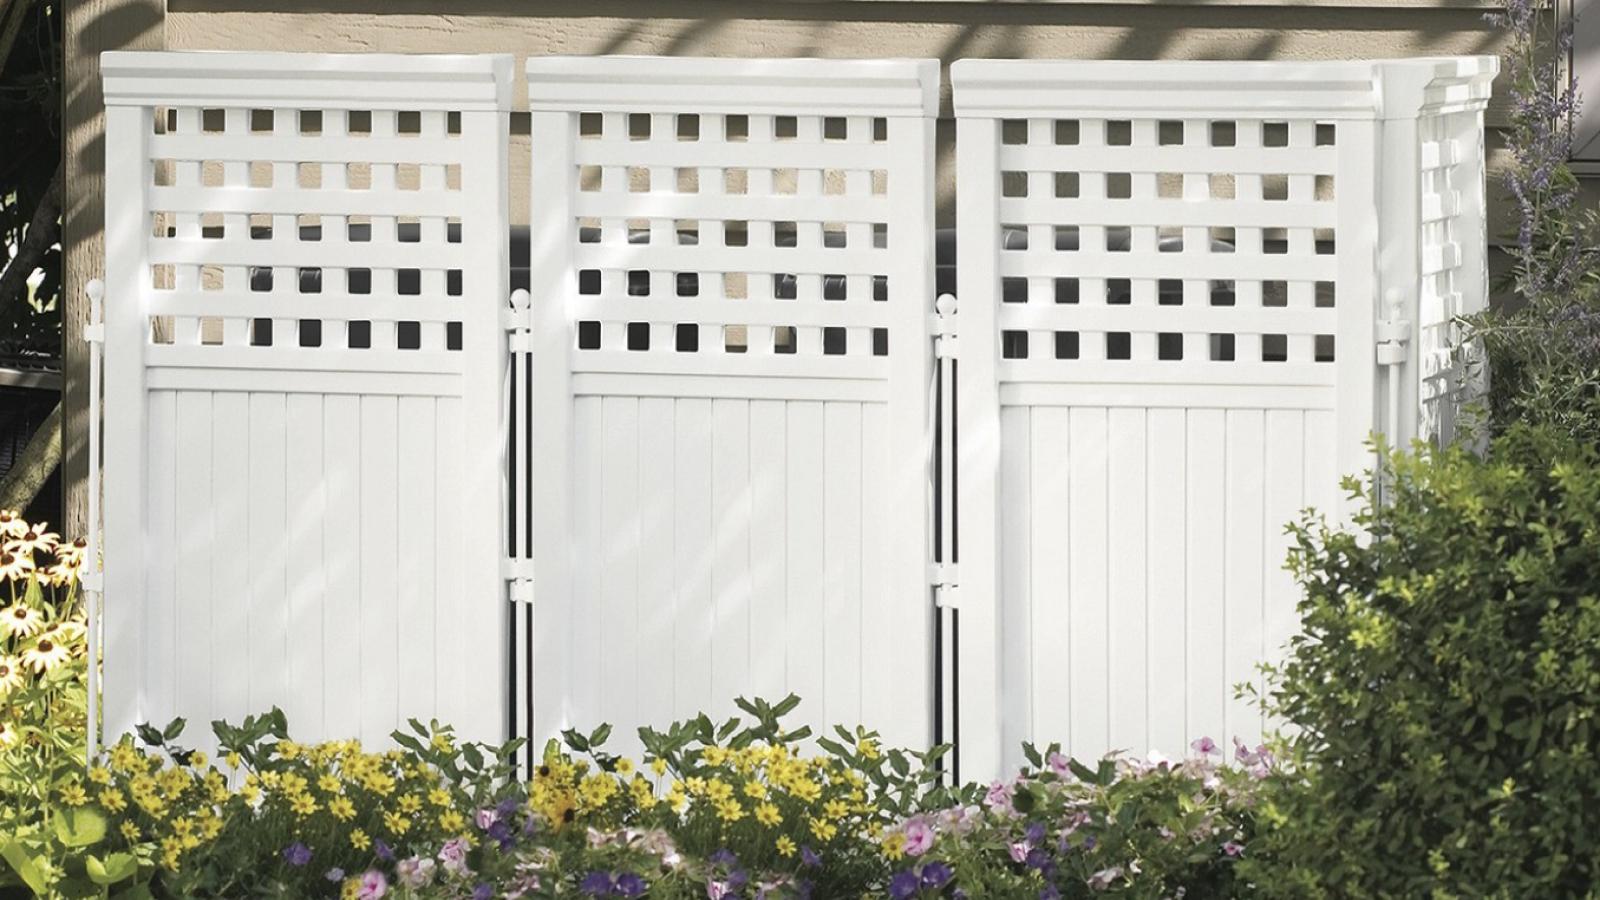 A tall, aesthetically-pleasing white fence conceals an outdoor HVAC unit.